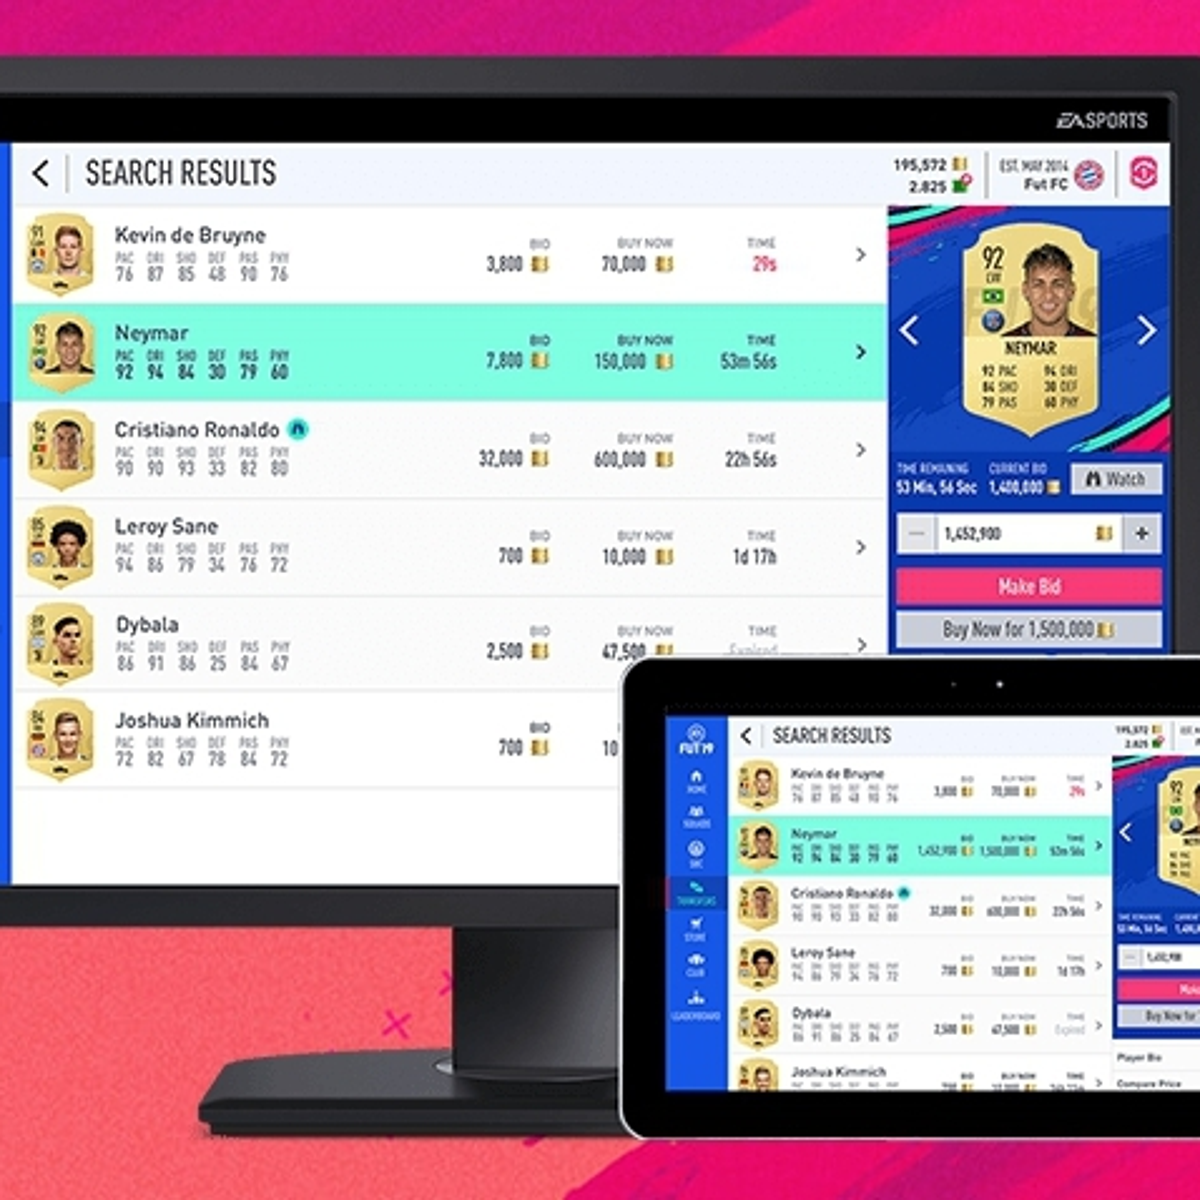 Fifa 19 Web App: what is the FUT companion and how can you get it?